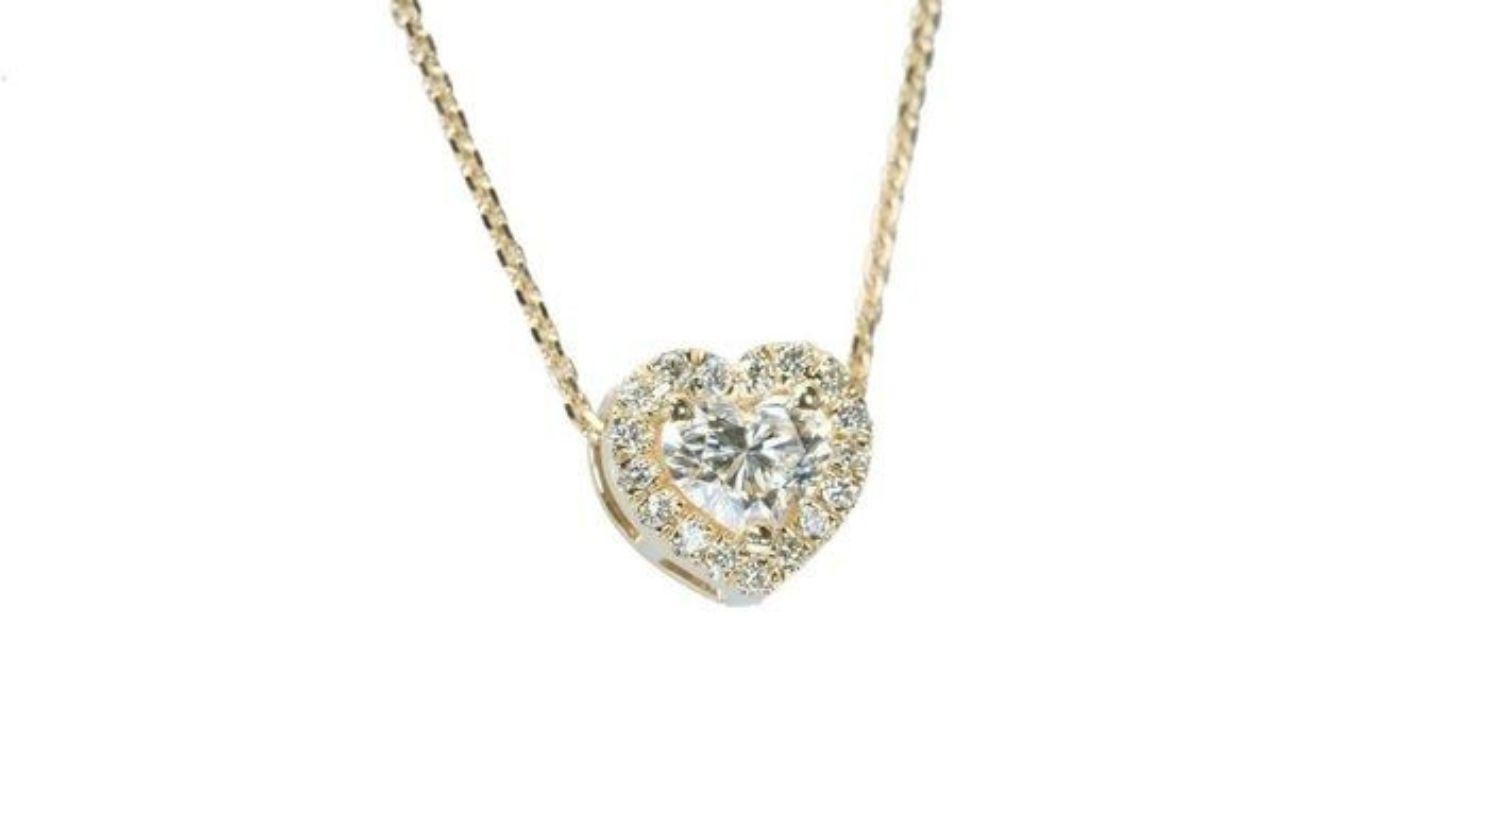 This exquisite necklace is a love letter to brilliance, featuring a mesmerizing 0.74 carat heart brilliant diamond that radiates pure enchantment. Its captivating cut catches every ray of light, transforming into a breathtaking kaleidoscope of